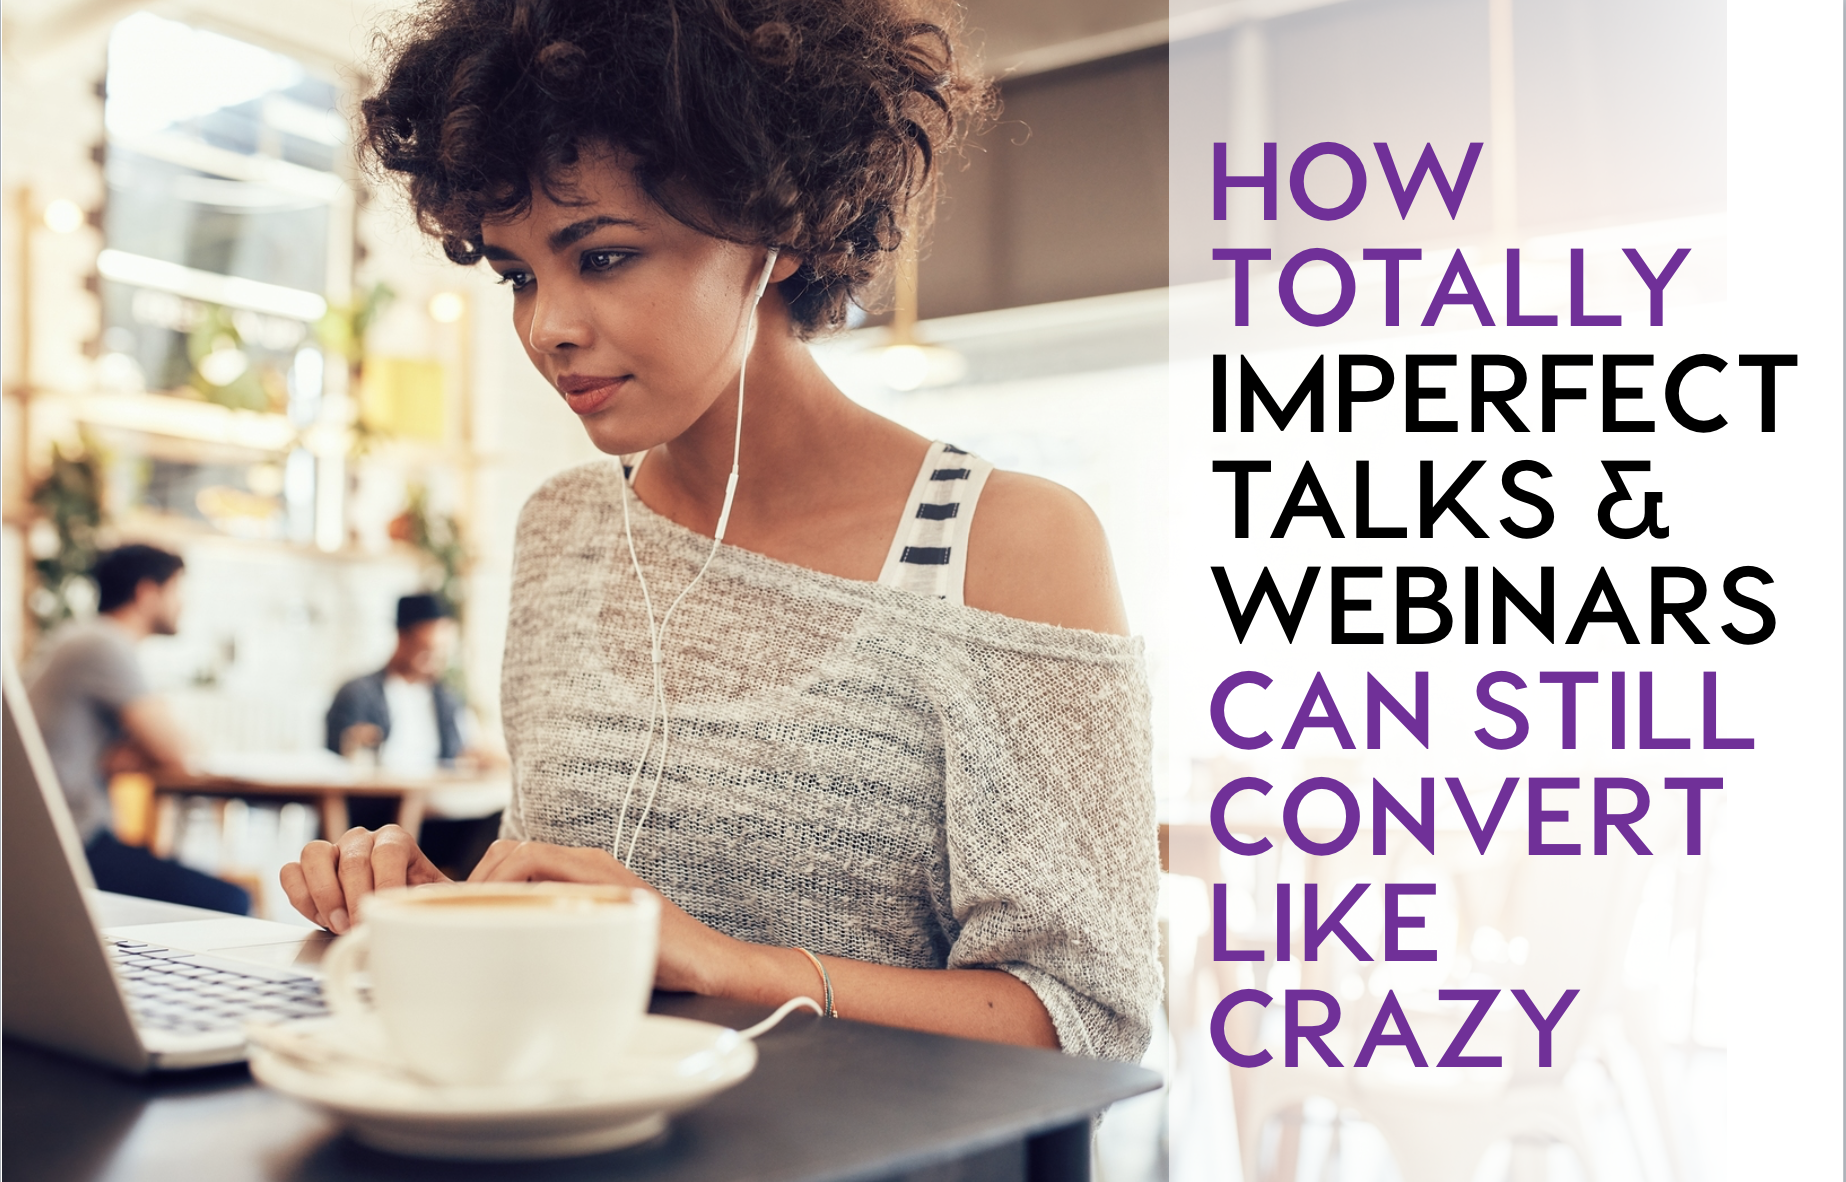 How Your Imperfect Talks & Webinars Can Still Convert Like Crazy